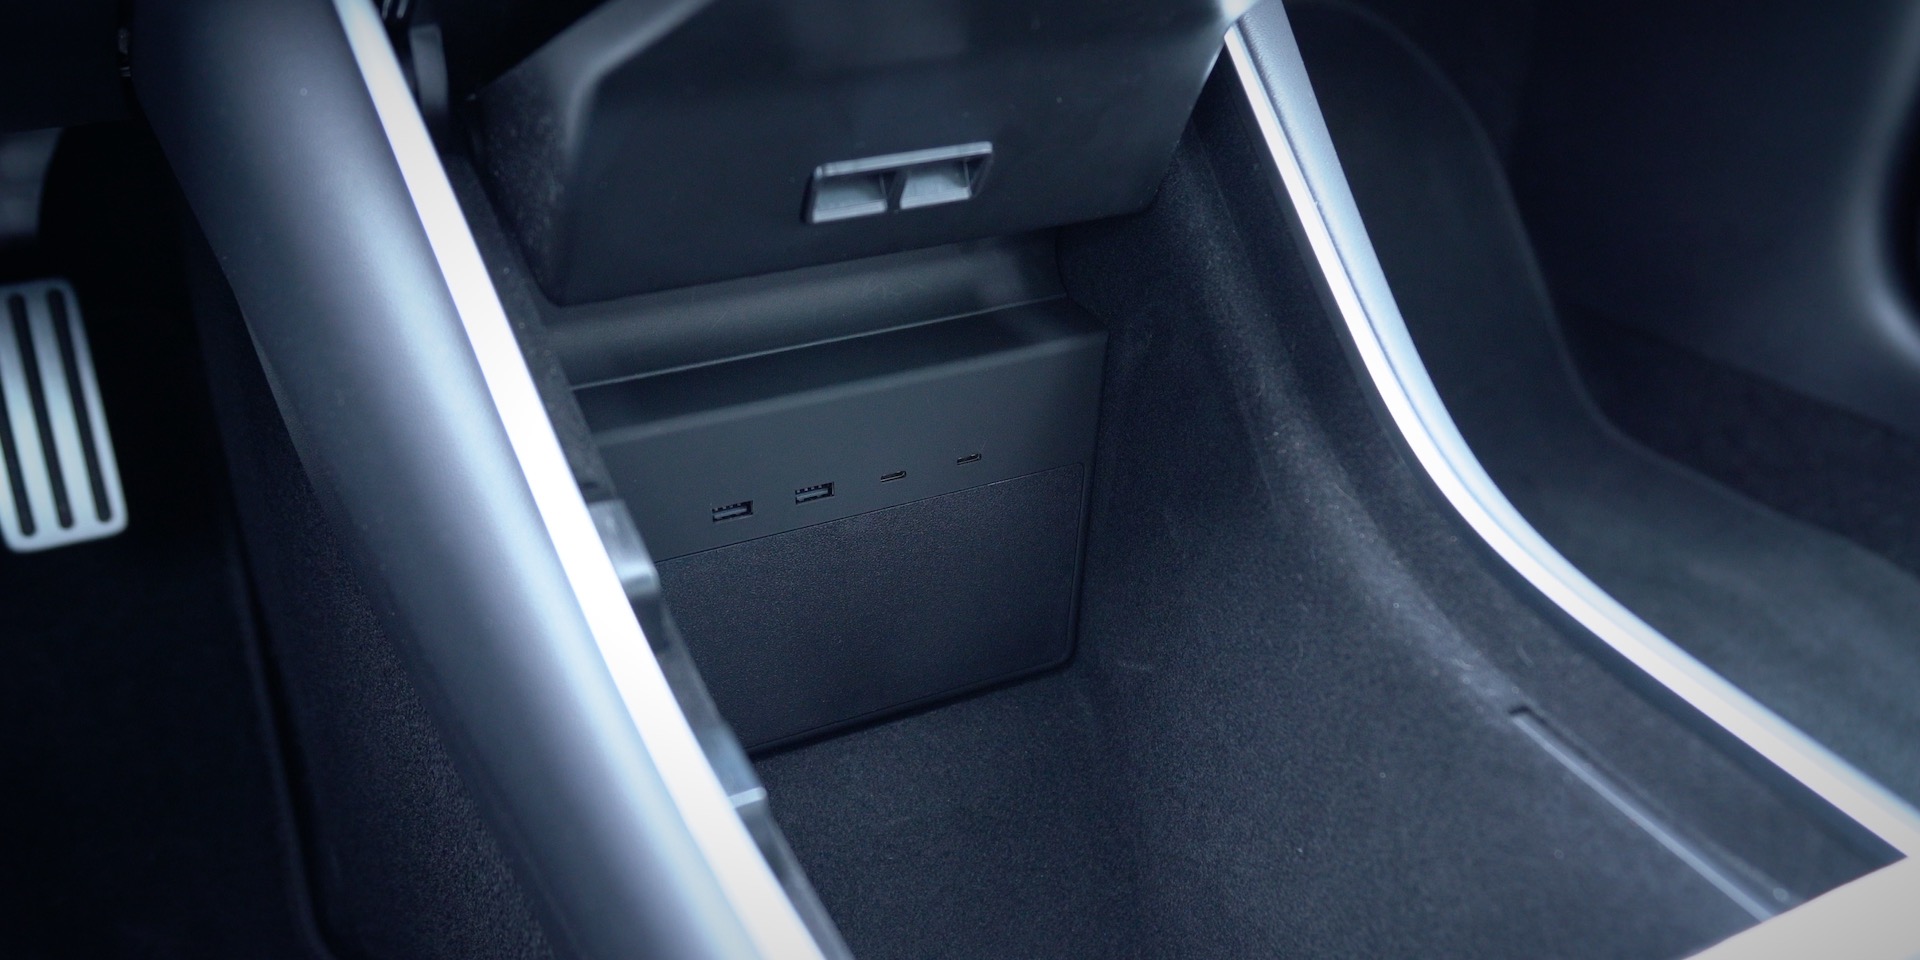 https://electrek.co/wp-content/uploads/sites/3/2019/11/Jeda-Hub-for-Tesla-Model-3-Review-Center-Console-Installed.jpg?quality=82&strip=all